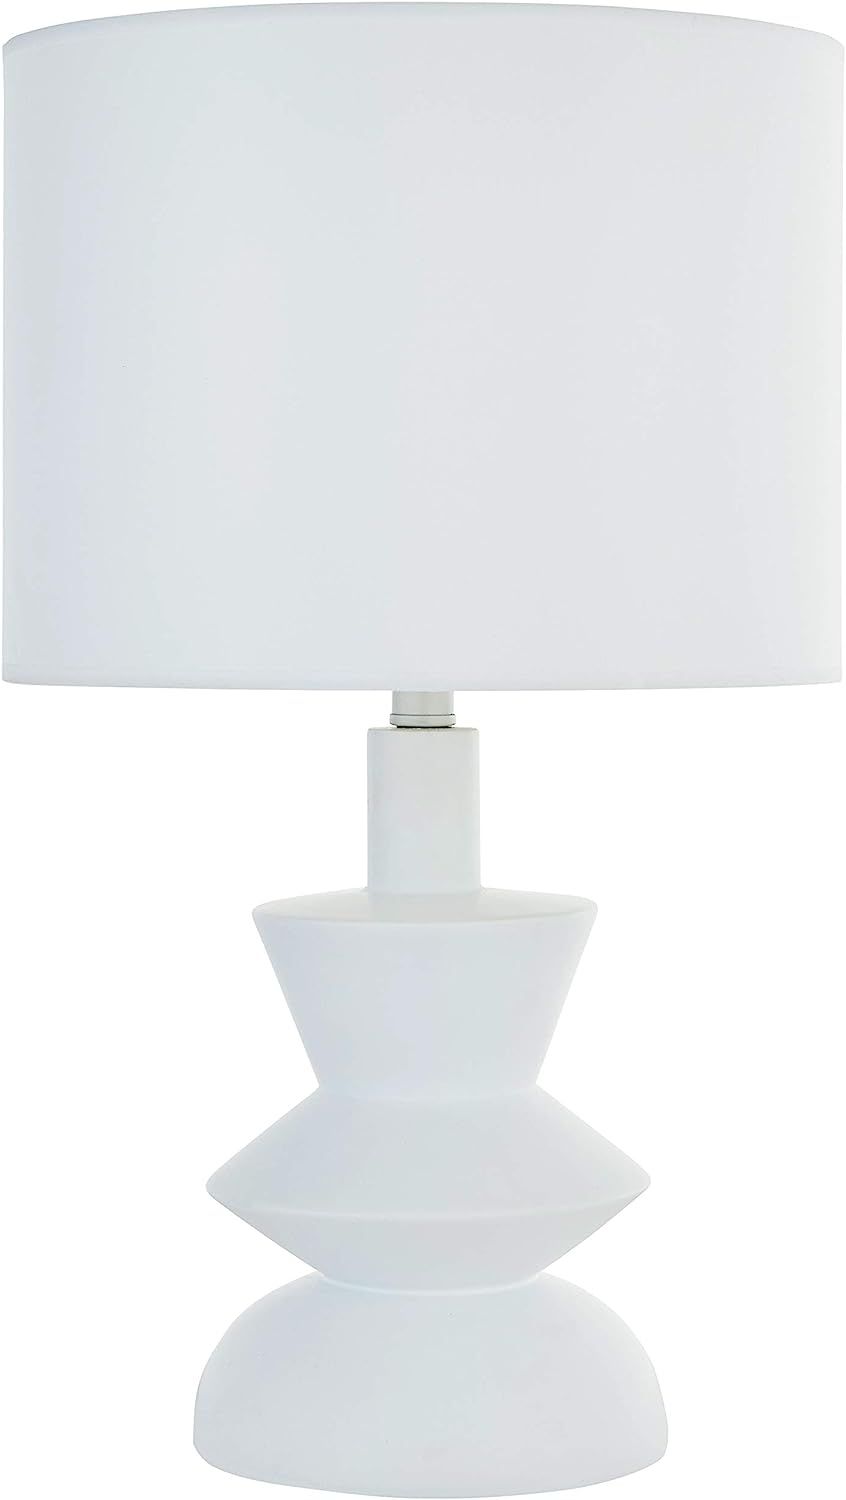 Rivet Mid-Century Contemporary Table Lamp with Bulb, 21"H, White | Amazon (CA)